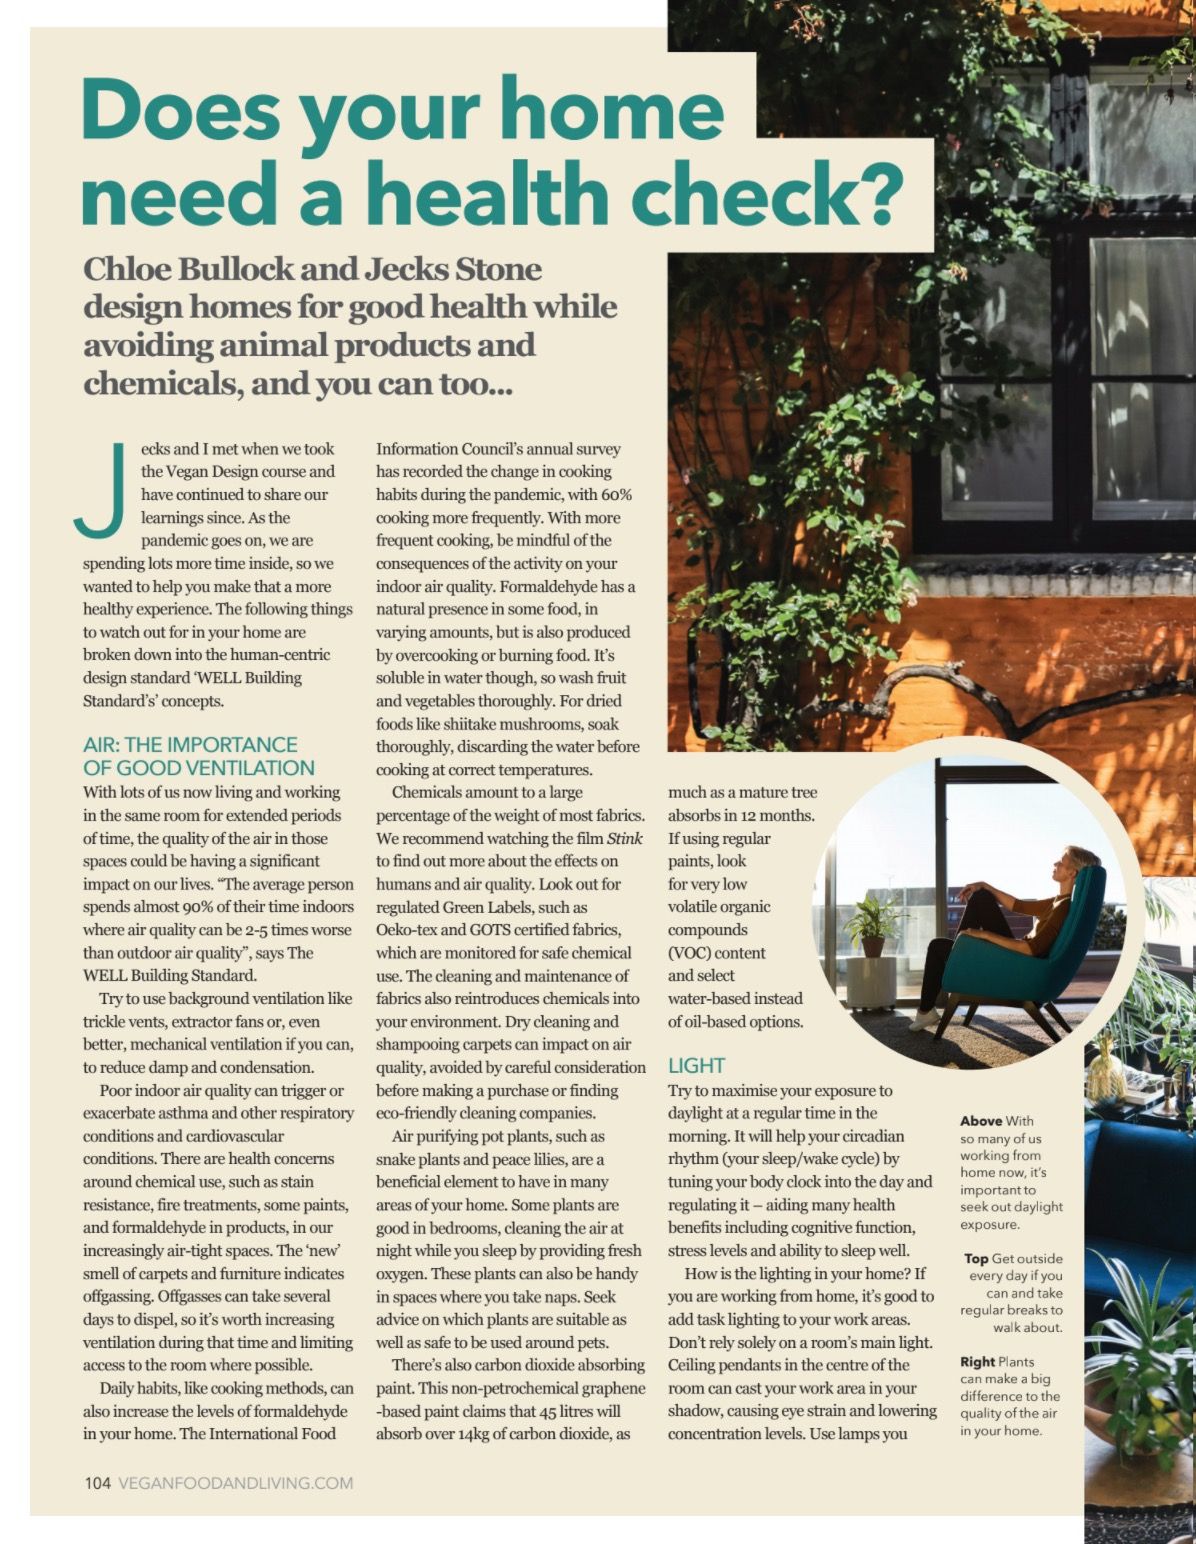 Vegan Food and Living magazine 'Does your home need a health check?'' - March 2021